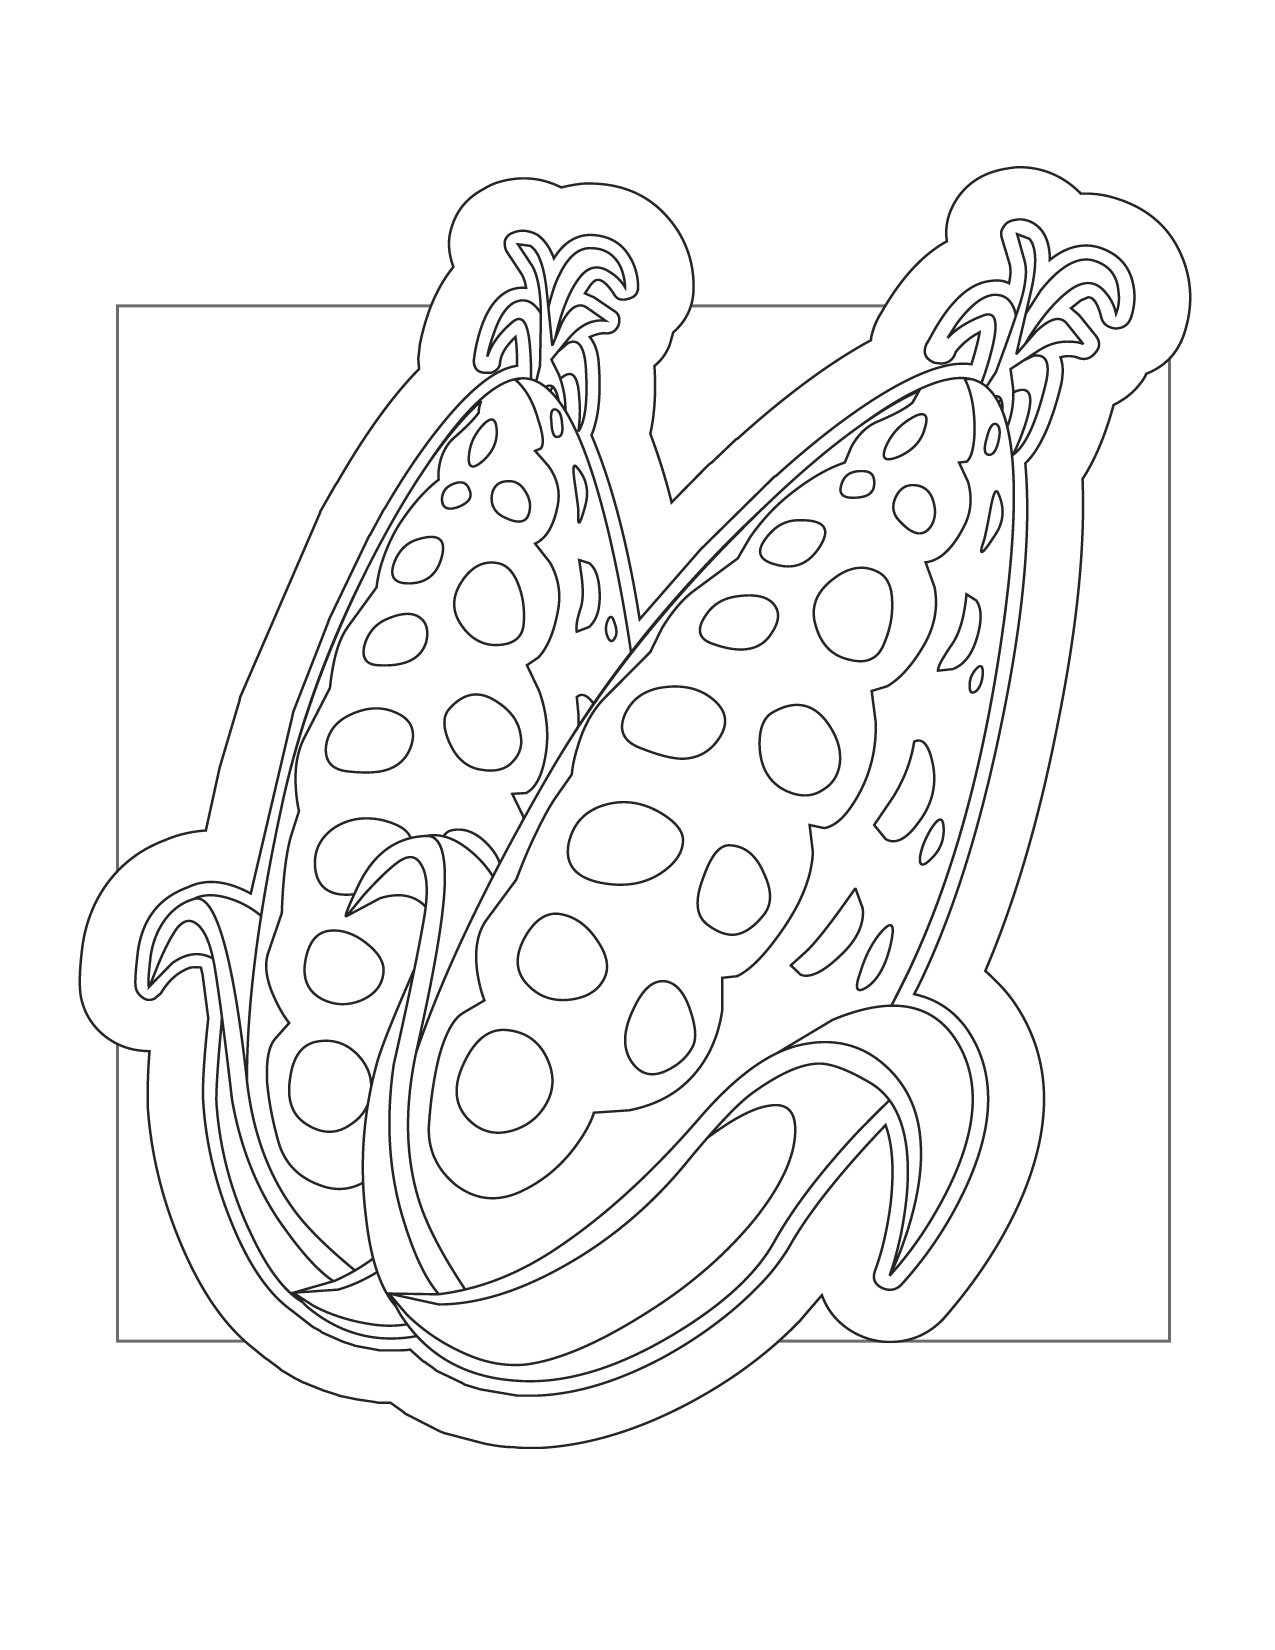 Two Ears Of Corn Coloring Page